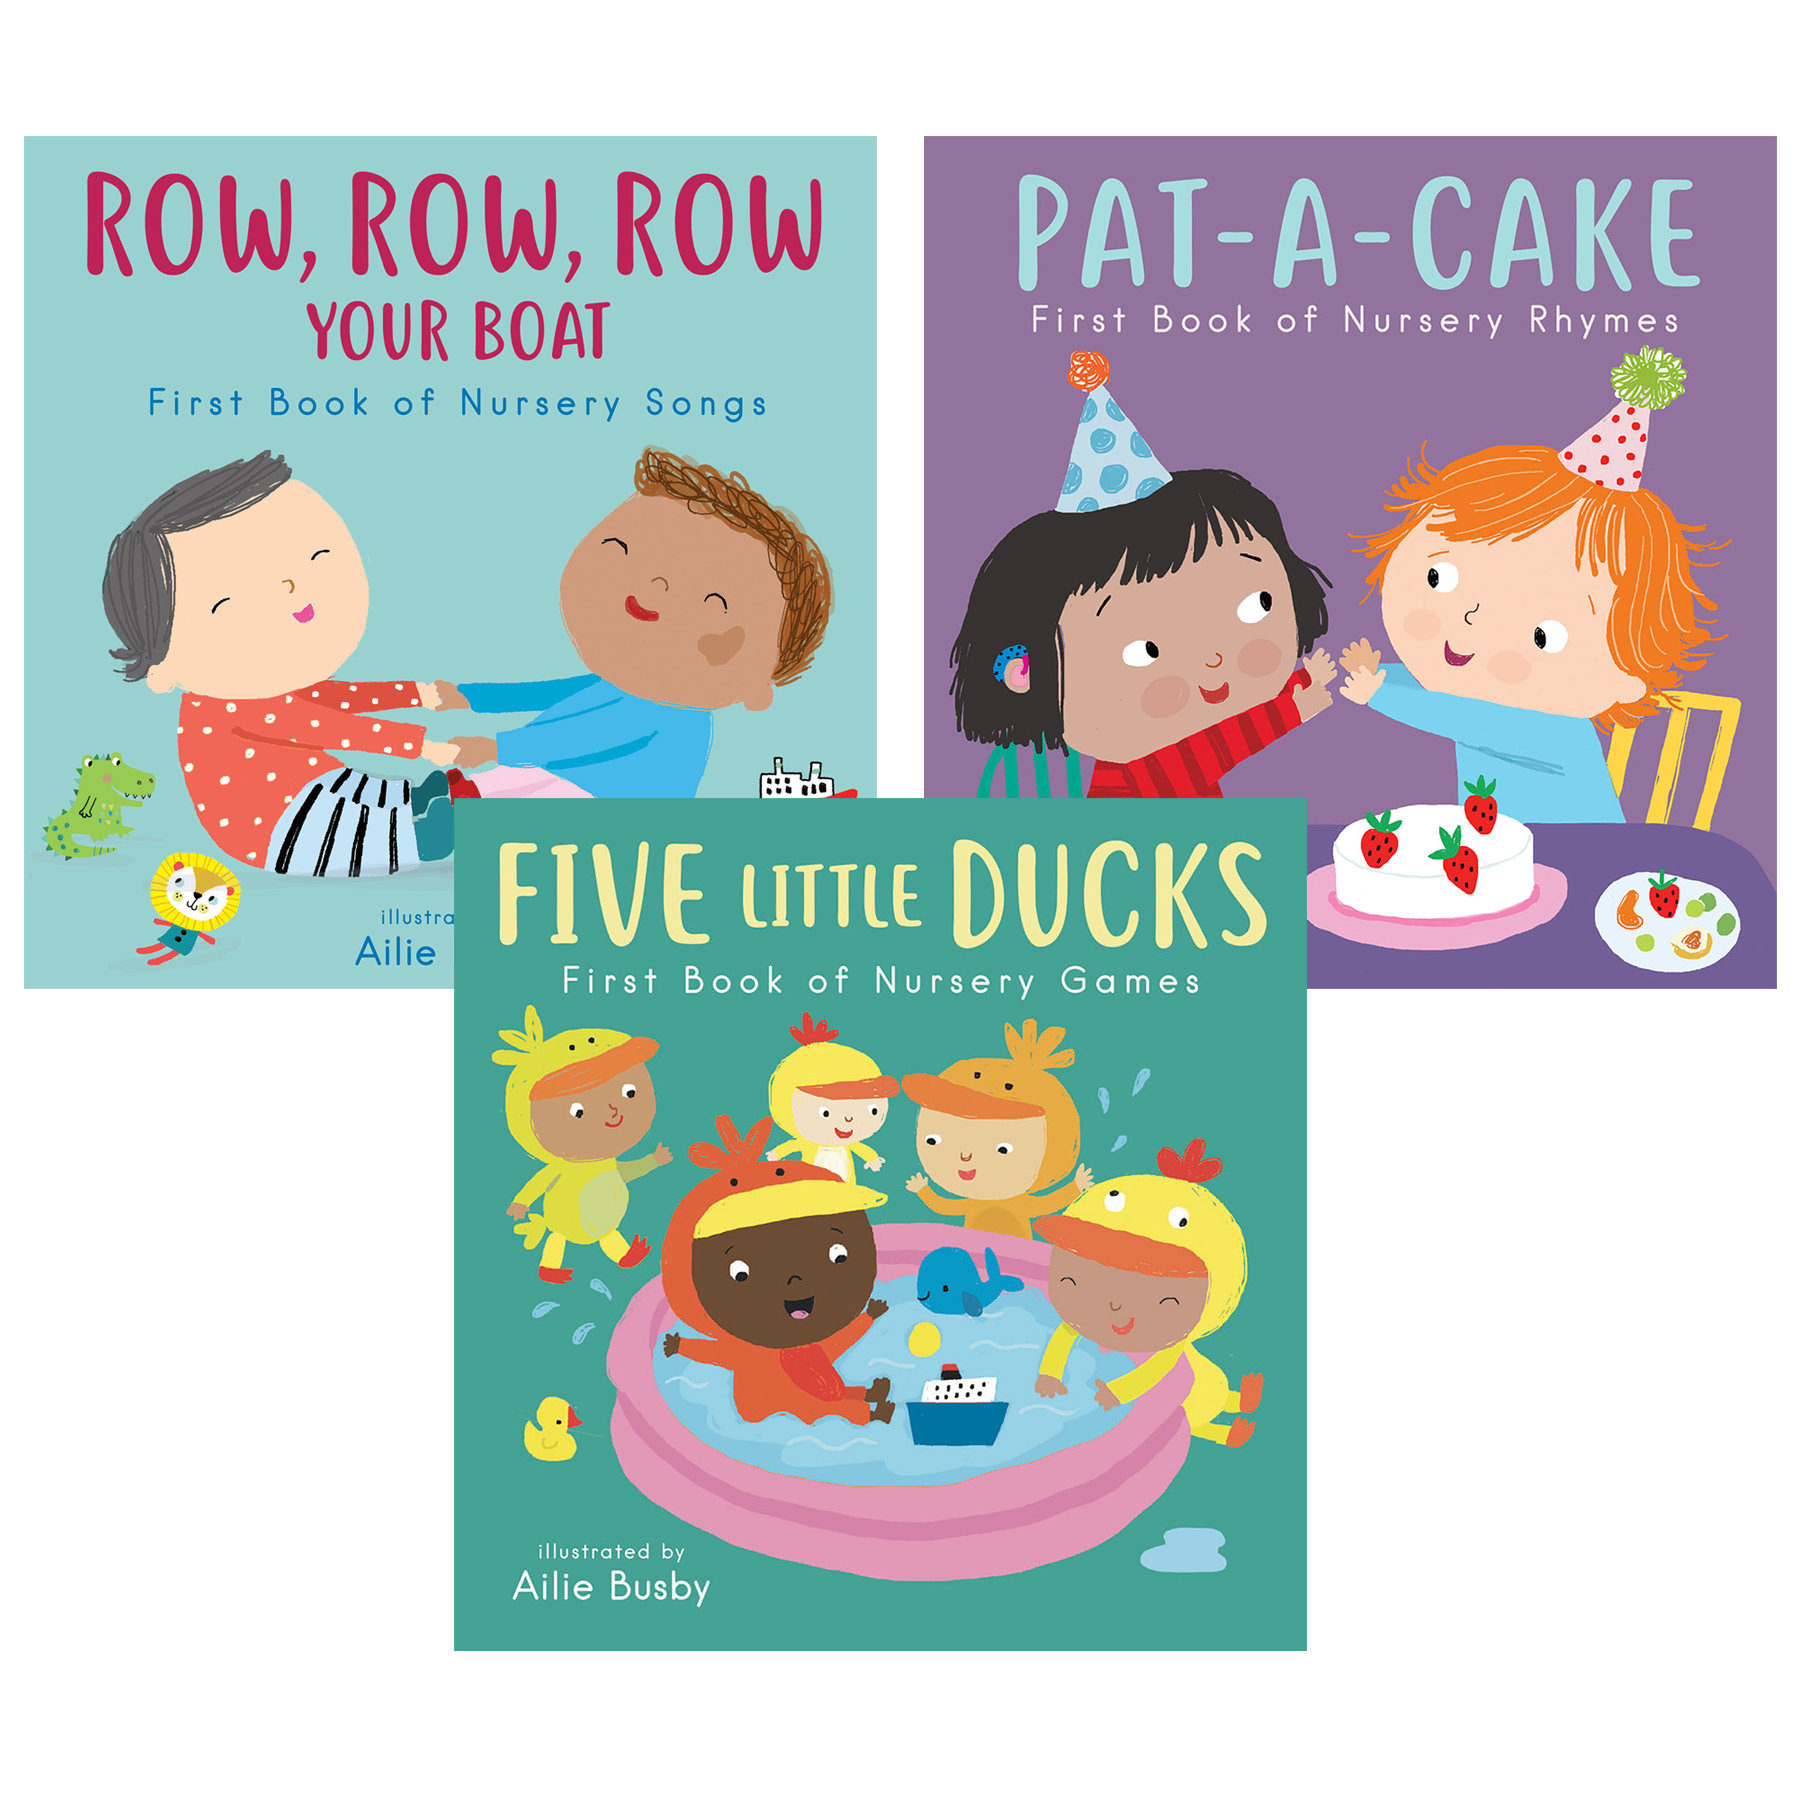 Child's Play Books First Book Board Books, Set of 3